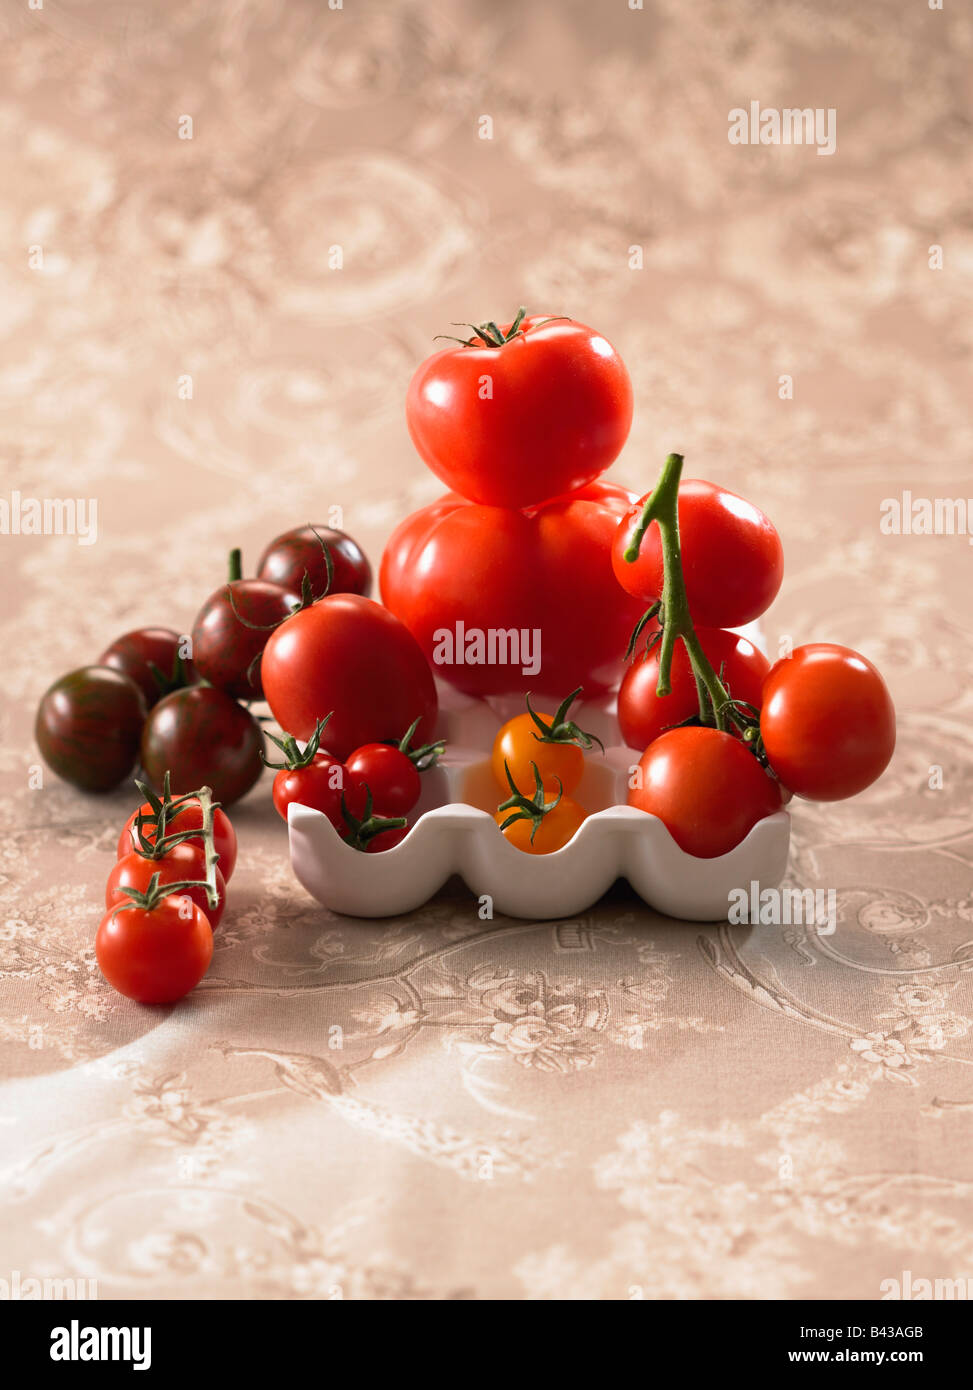 Selection of tomatoes Stock Photo